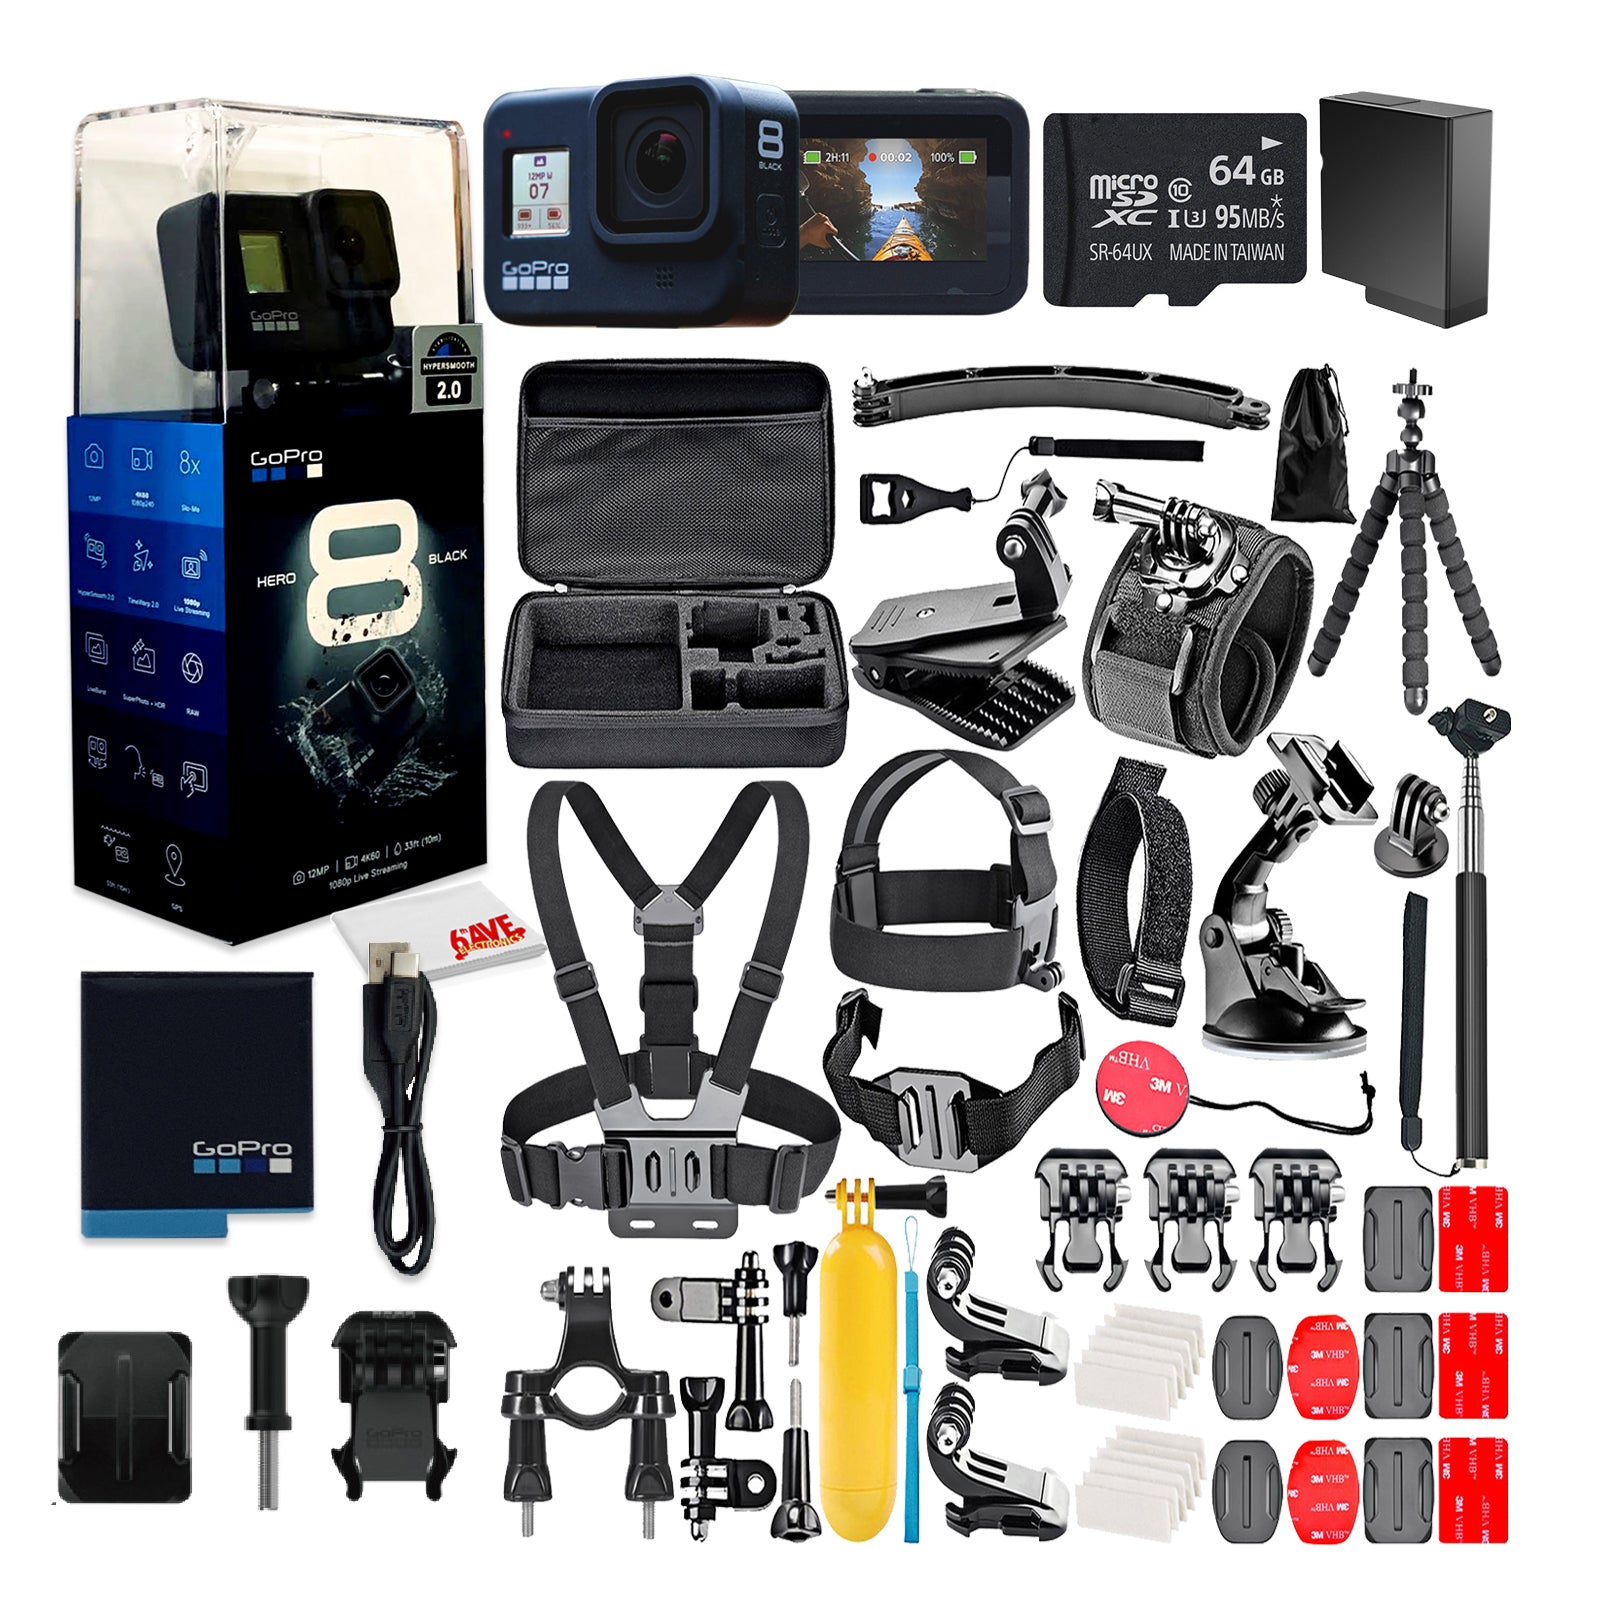 GoPro HERO8 Black Digital Action Camera, Waterproof, Touch Screen - W/ 50 Piece Accessory Kit + 64GB Memory Card + Extra Battery